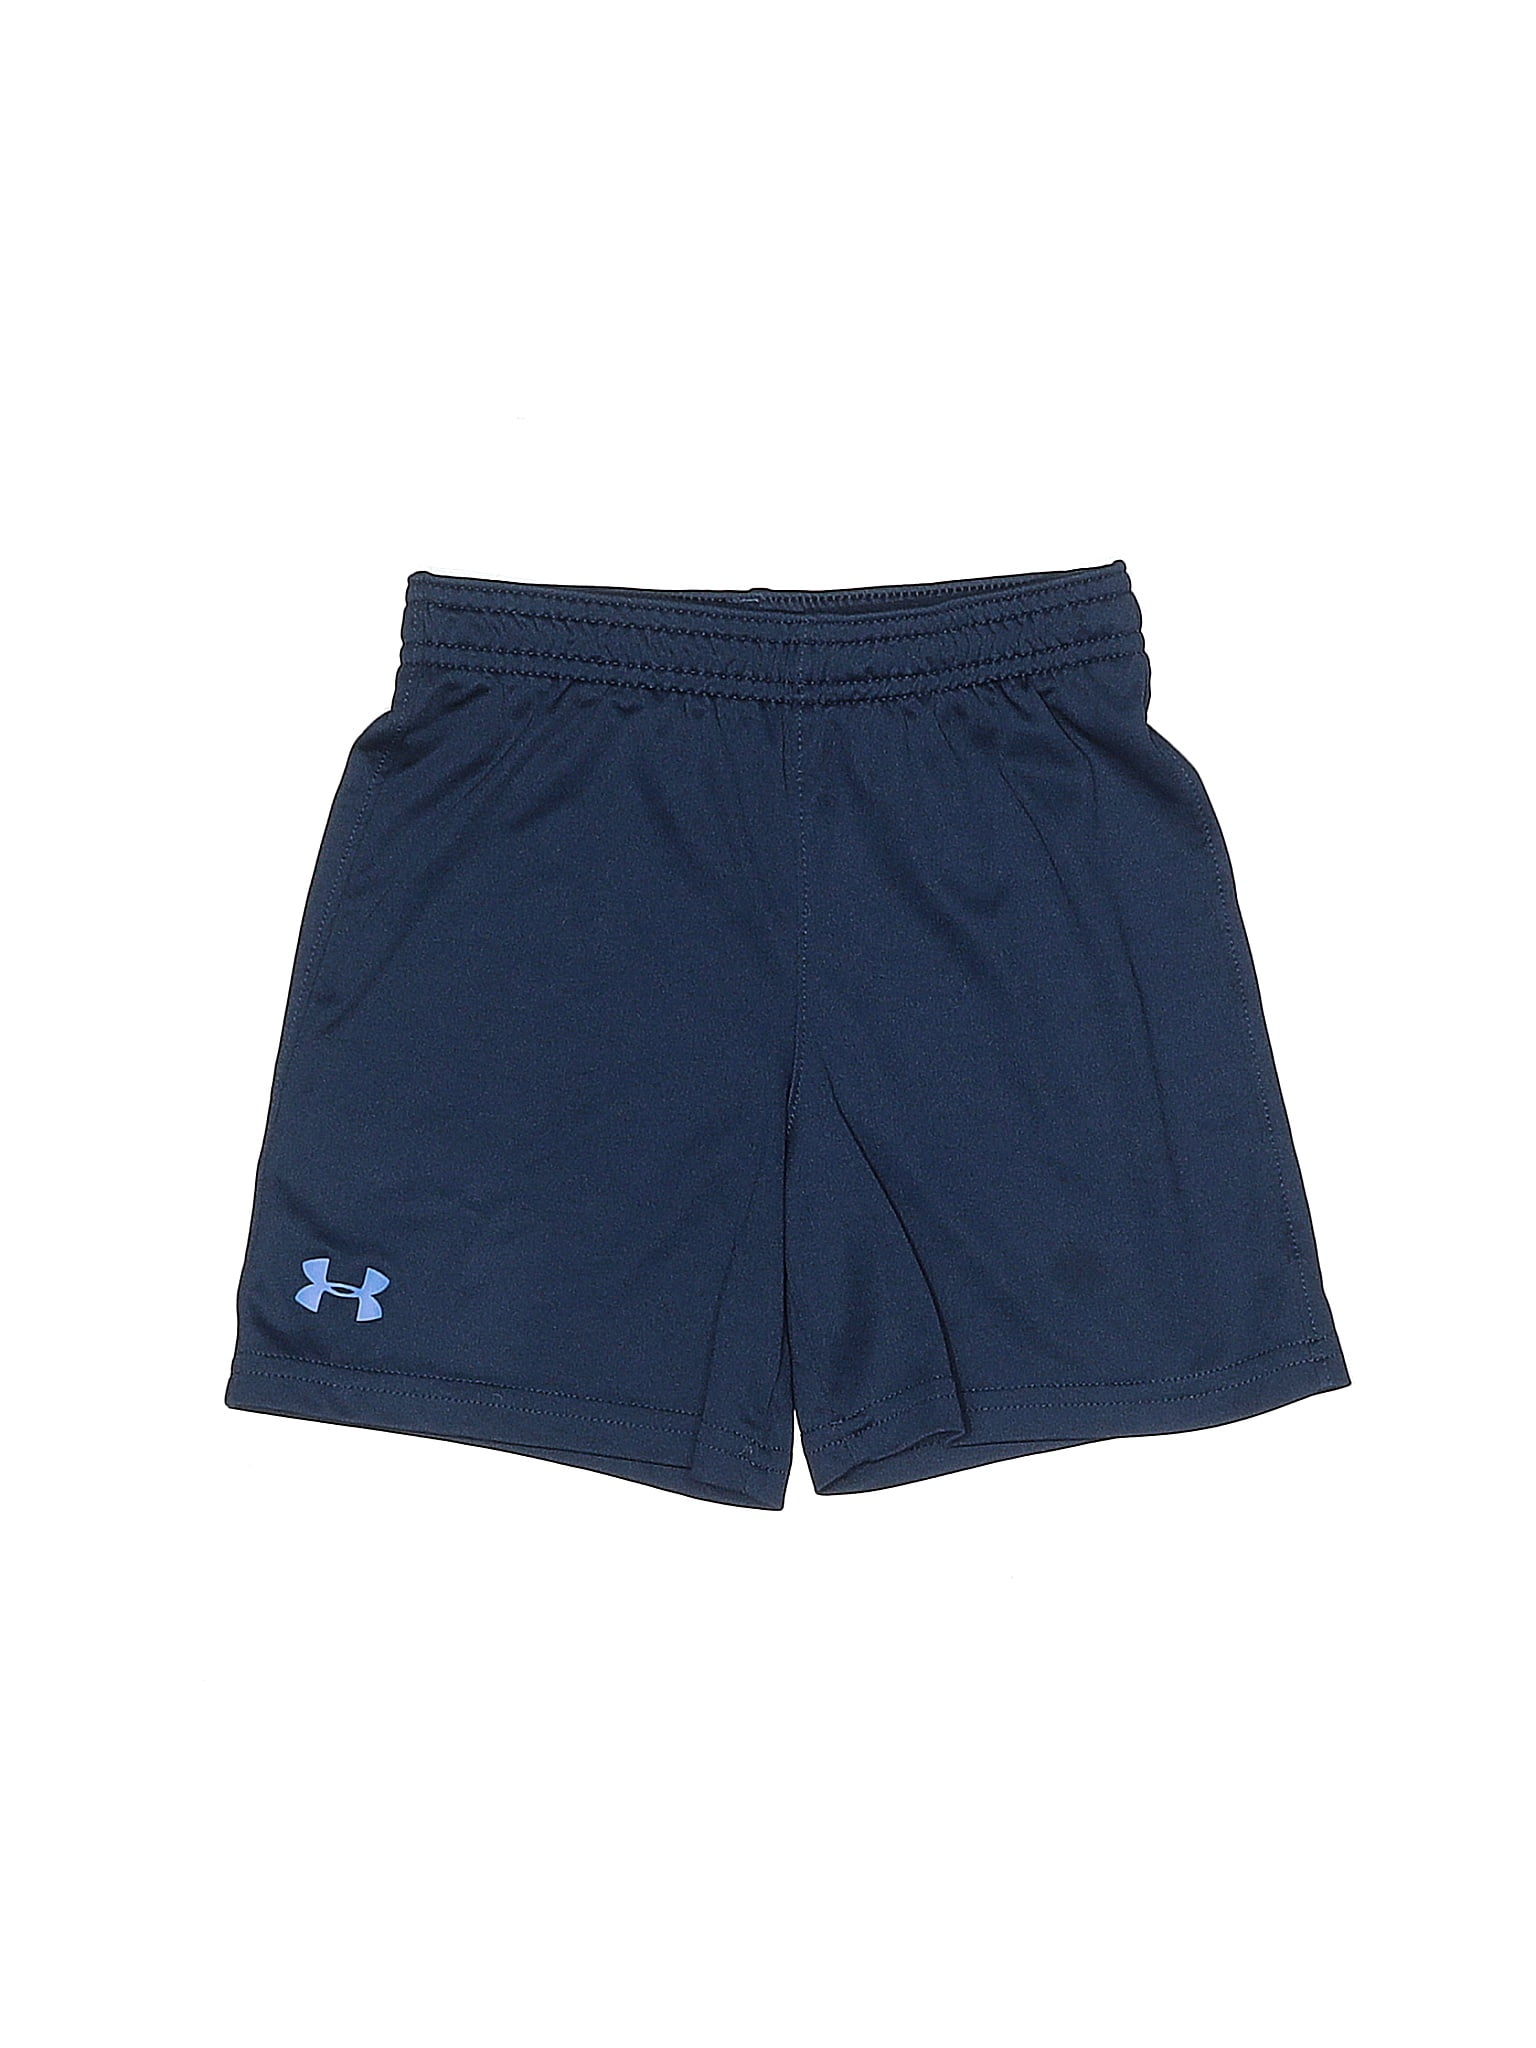 Under Armour Solid Blue Athletic Shorts Size 2T - 38% off